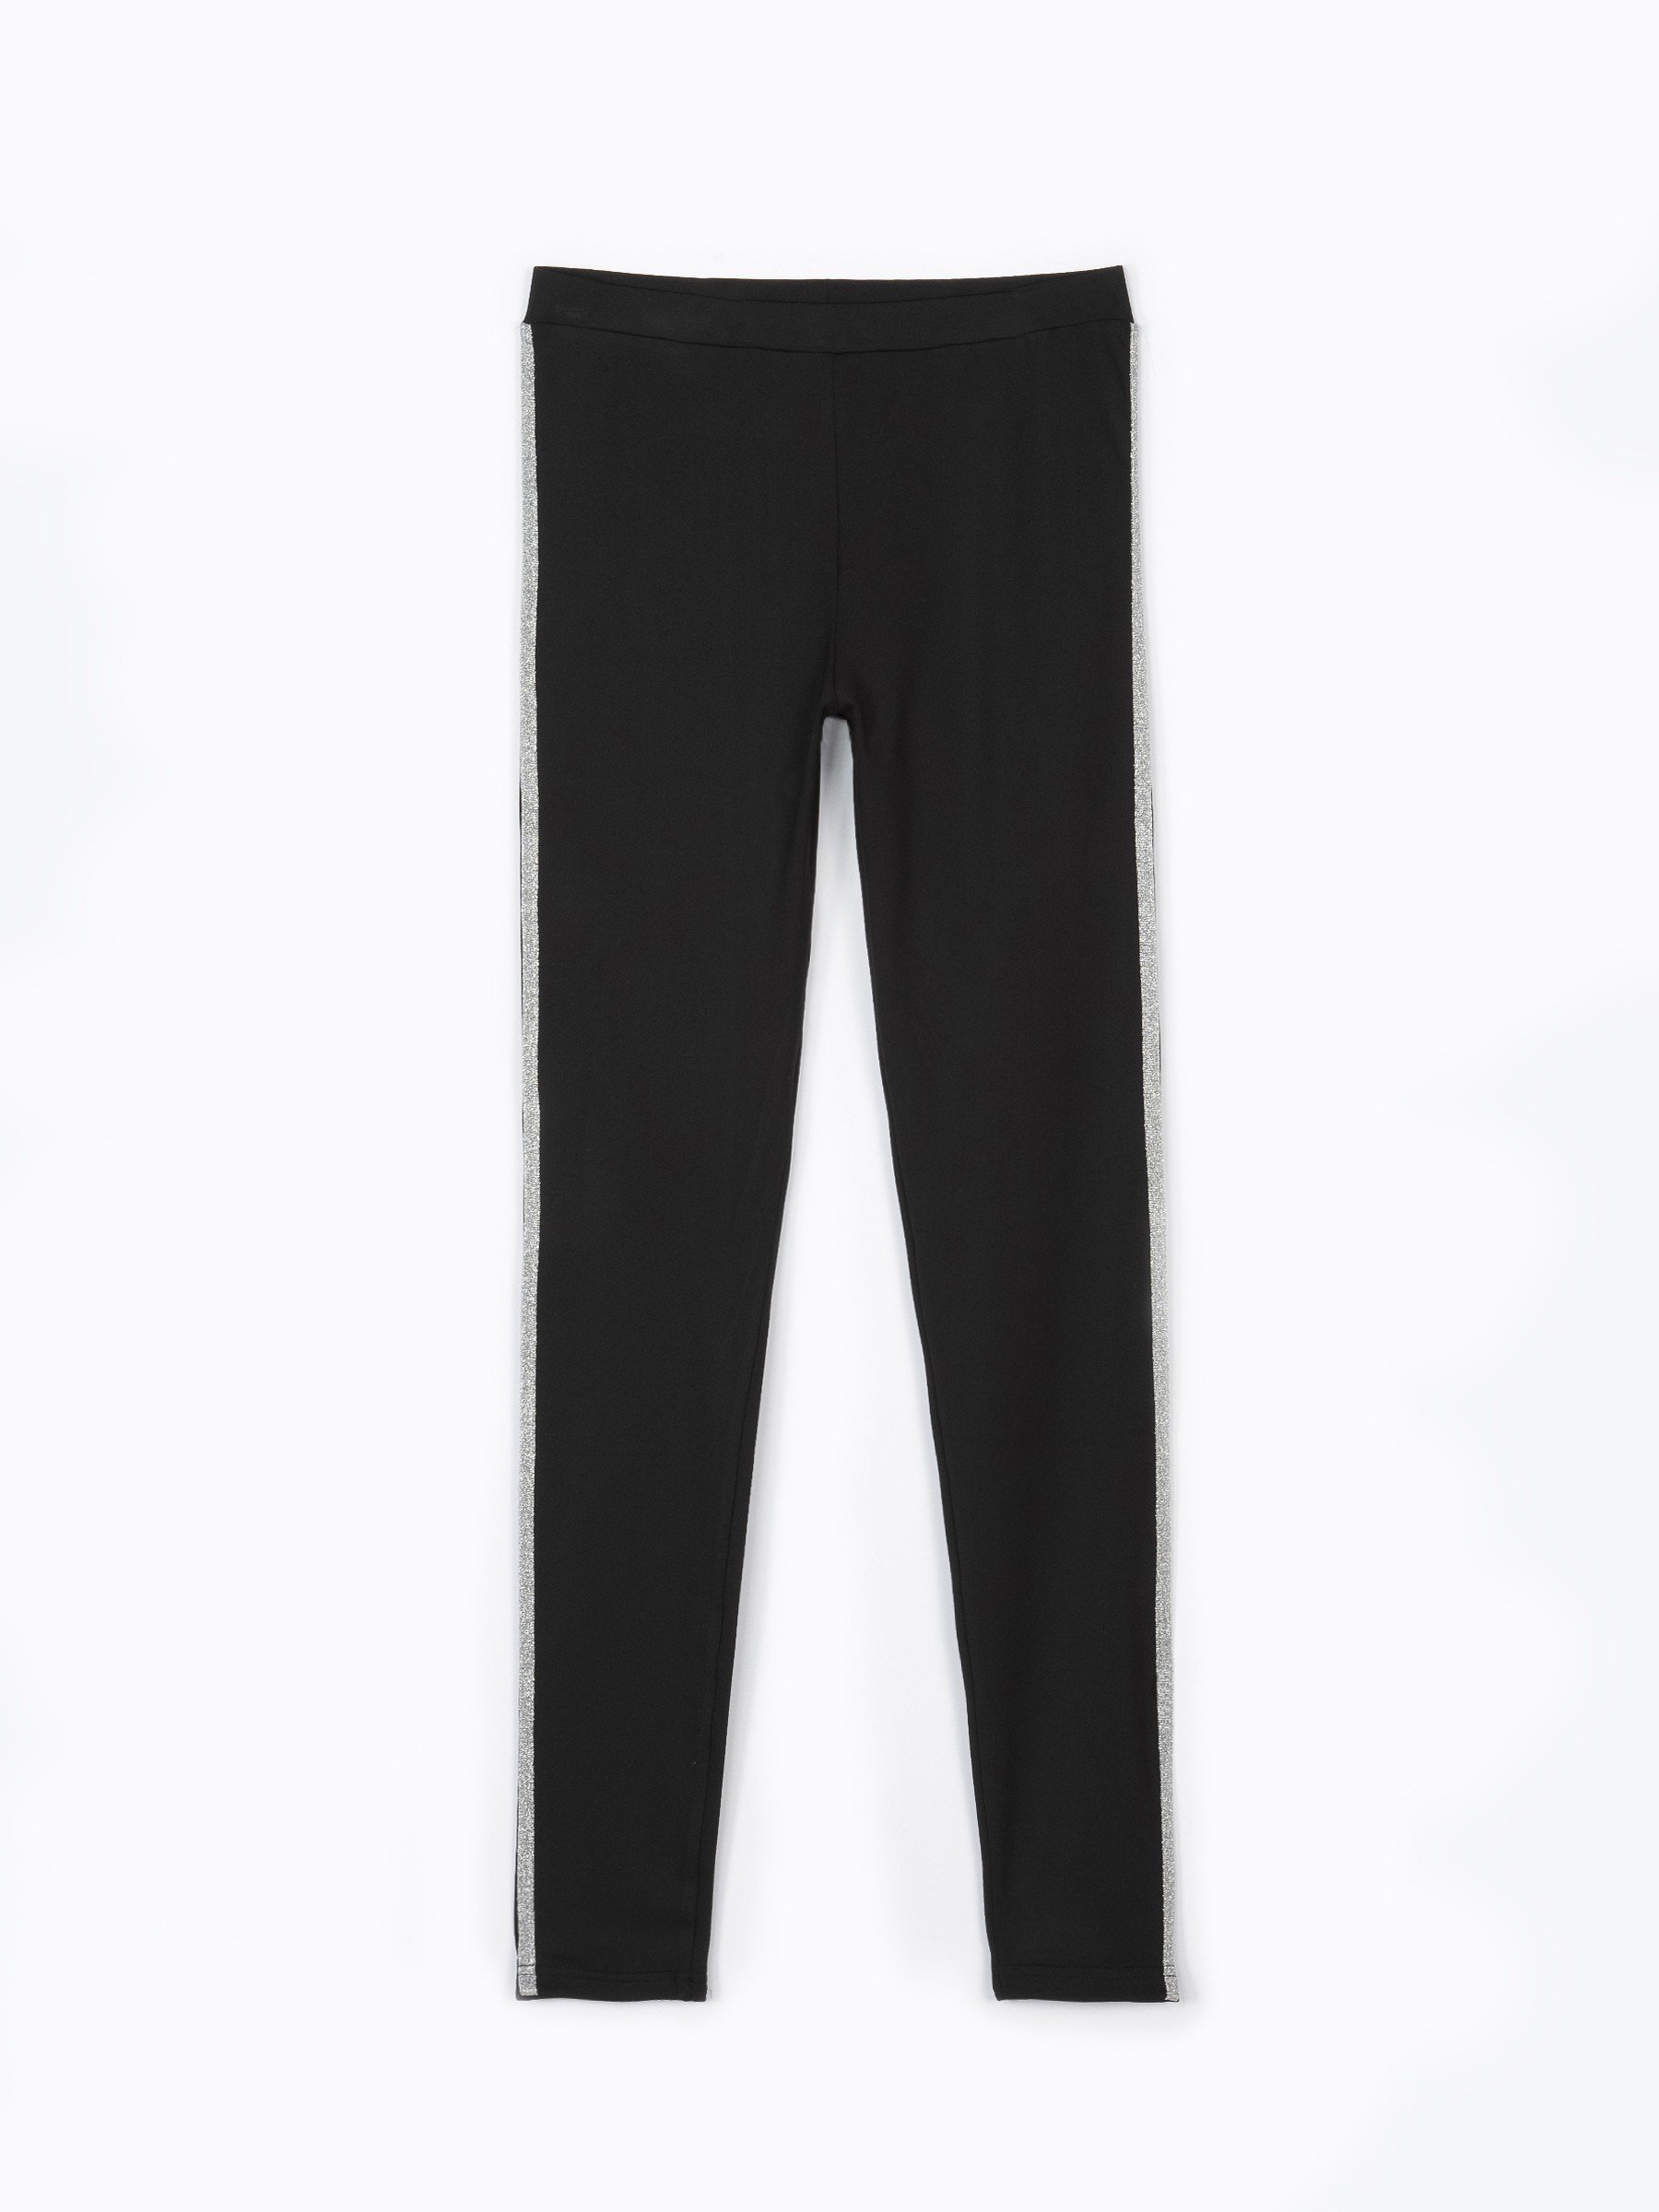 black trousers with silver side stripe